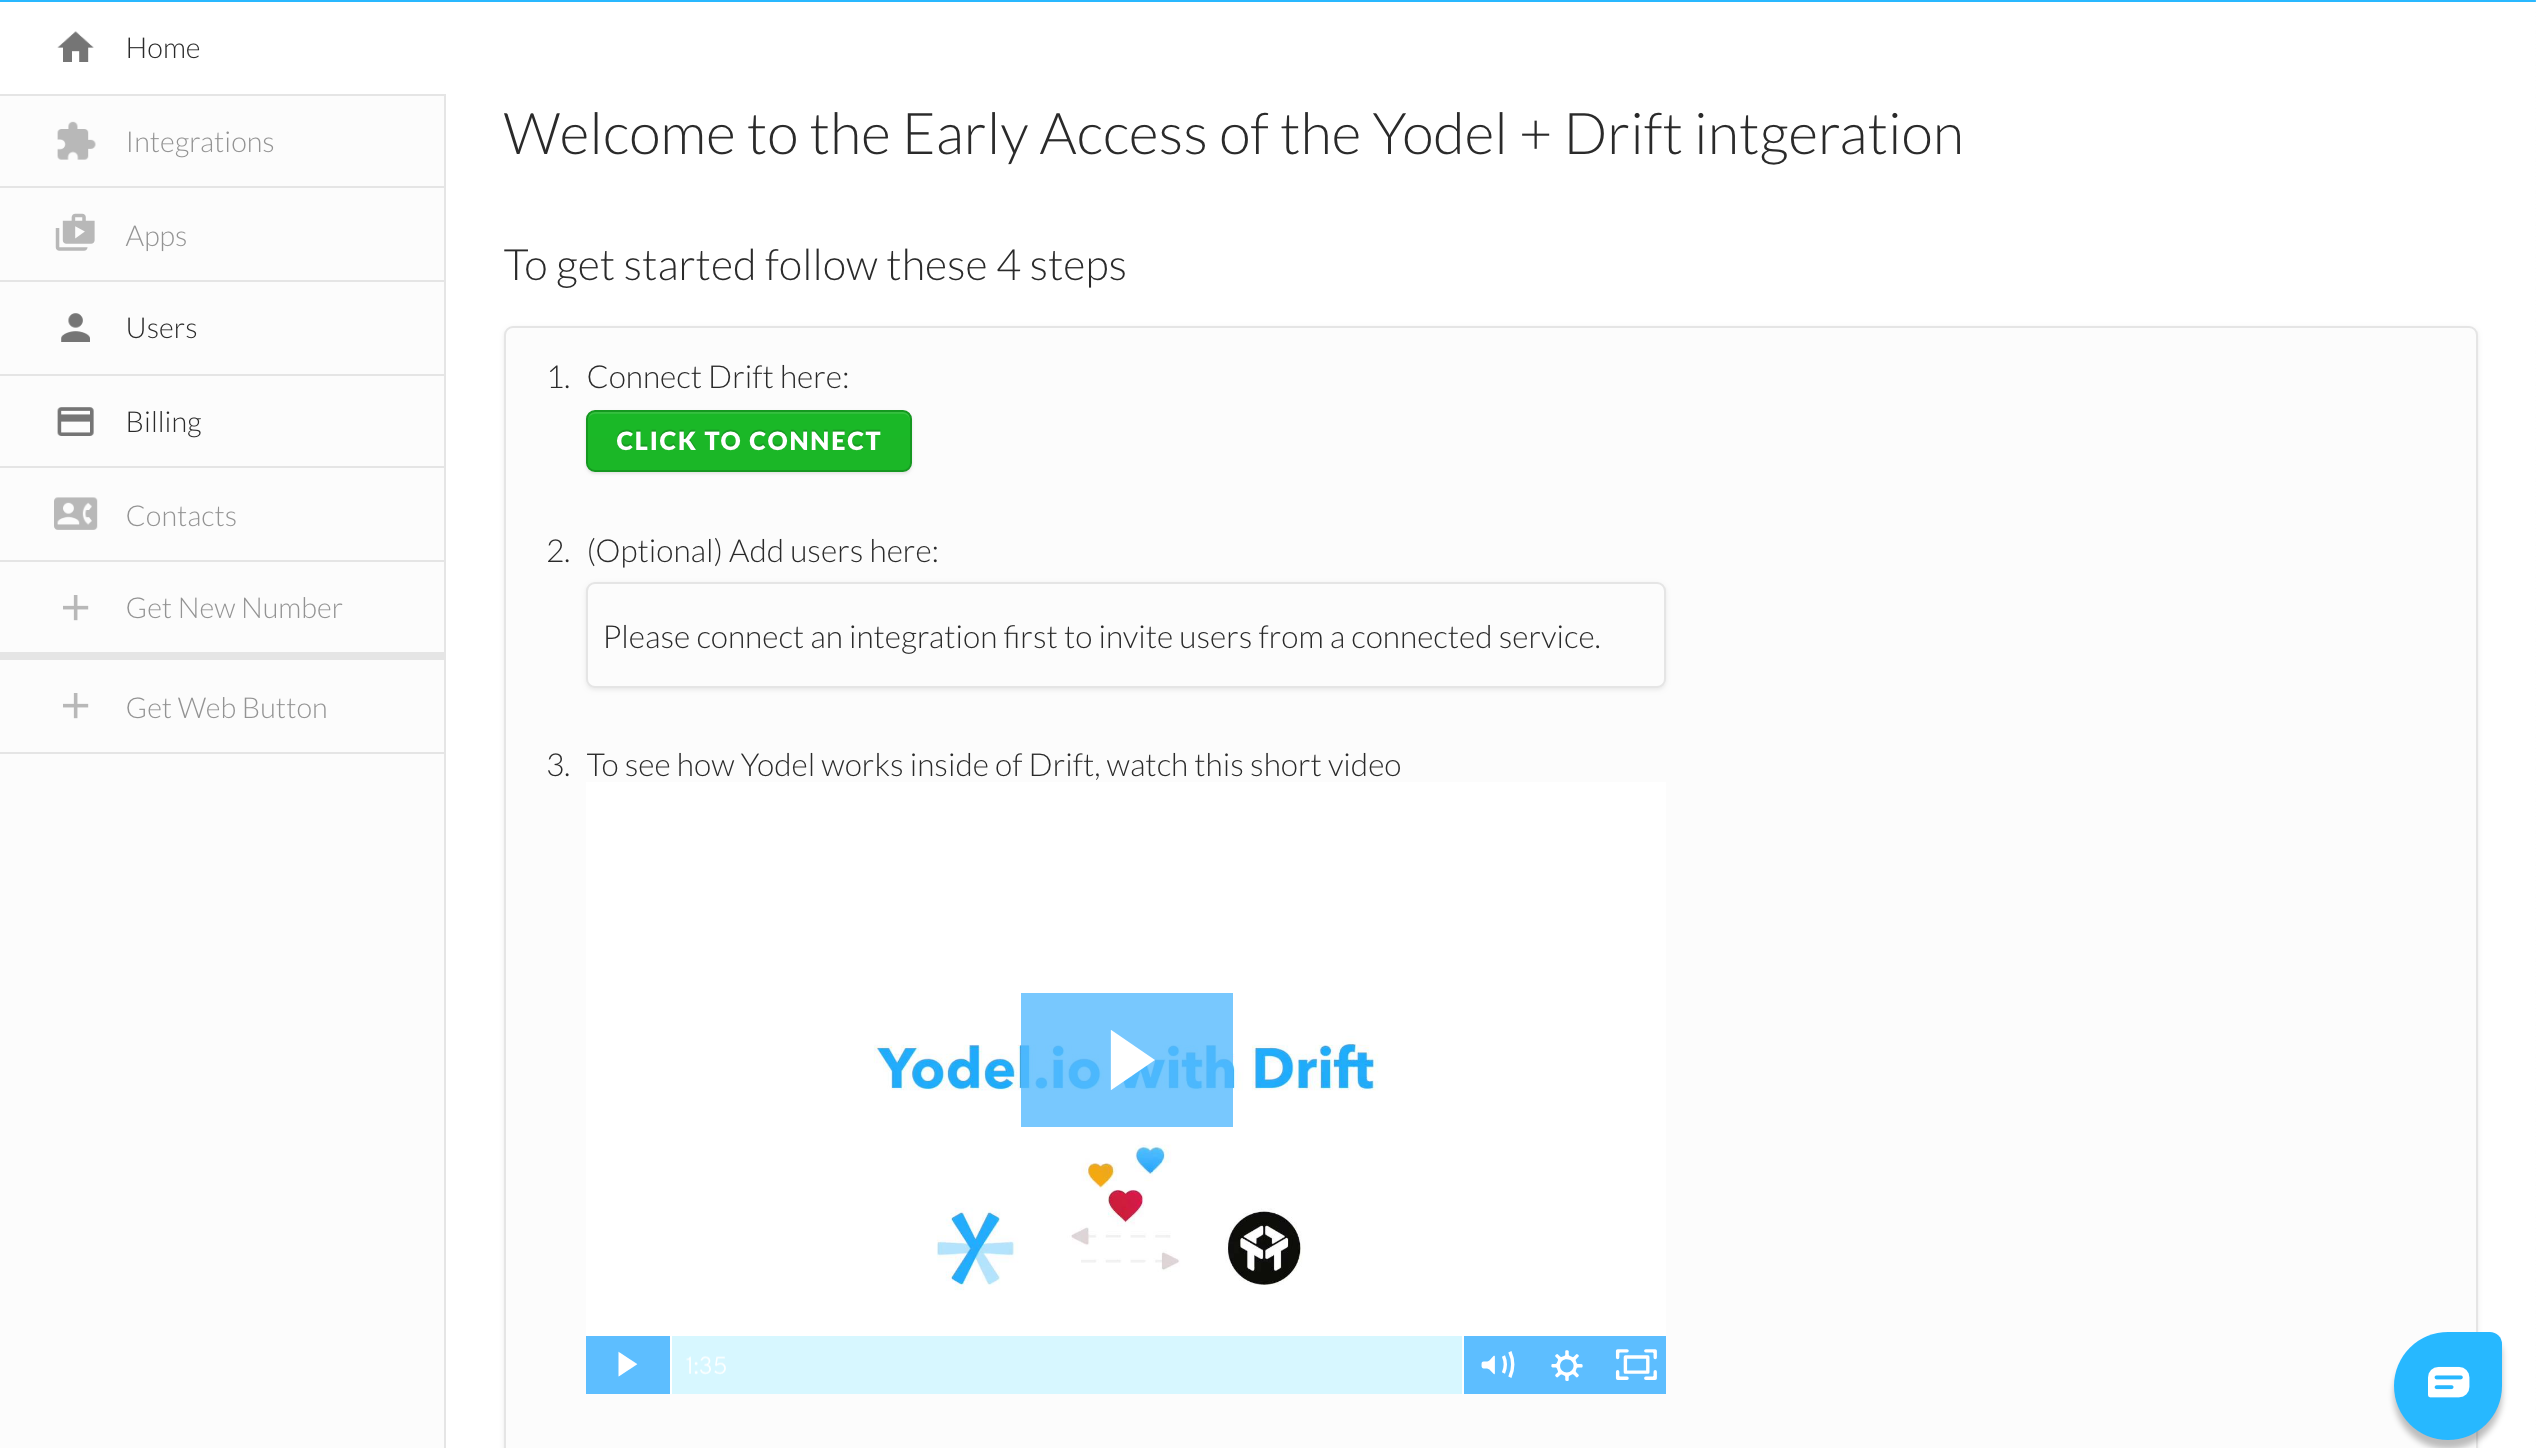 Once you sign up to try.yodel.io/drift, you can connect to your Drift account and start making voice calls in your live chats.